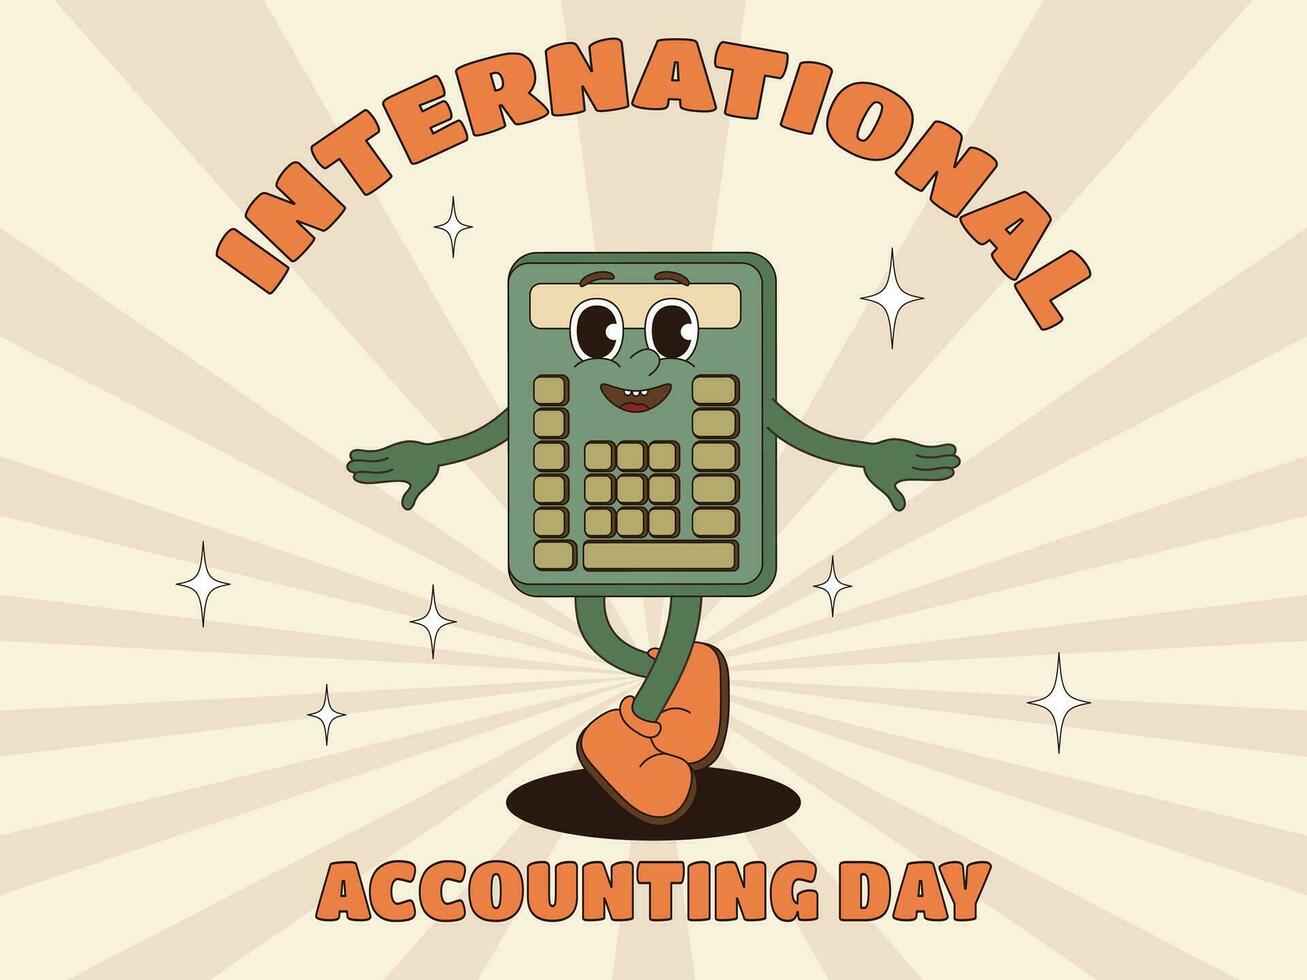 Poster for international accounting day. Postcard with a calculator character in retro style vector